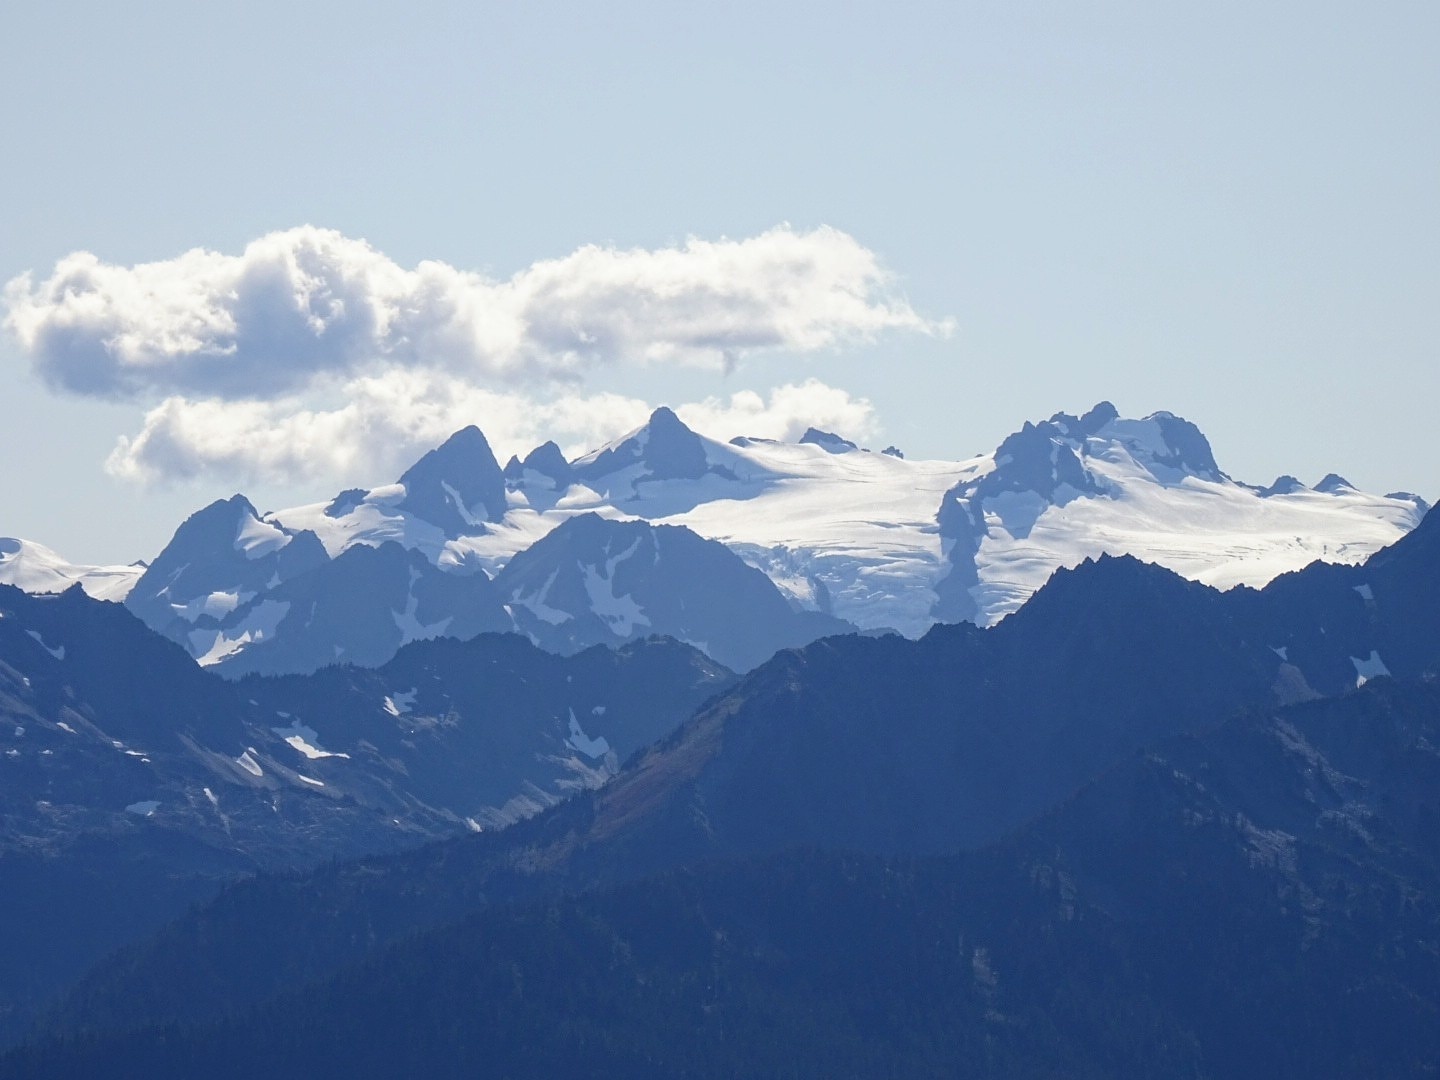 The glacier clad Mount Olympus, the tallest peak in the Olympic mountains at 7980 ft.